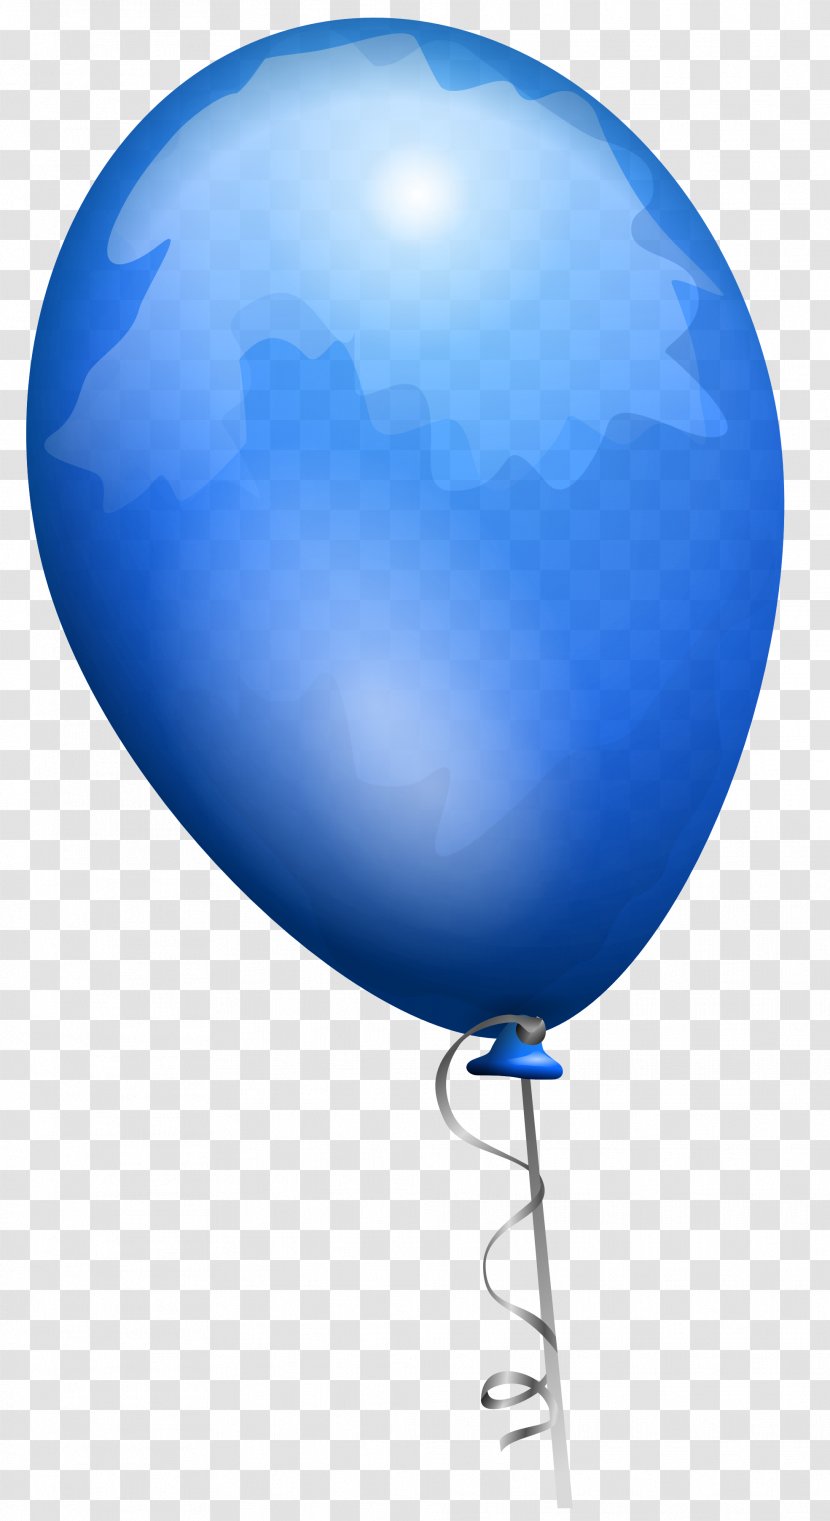 Balloon Clip Art - Blue - Red Image, Free Download Transparent PNG